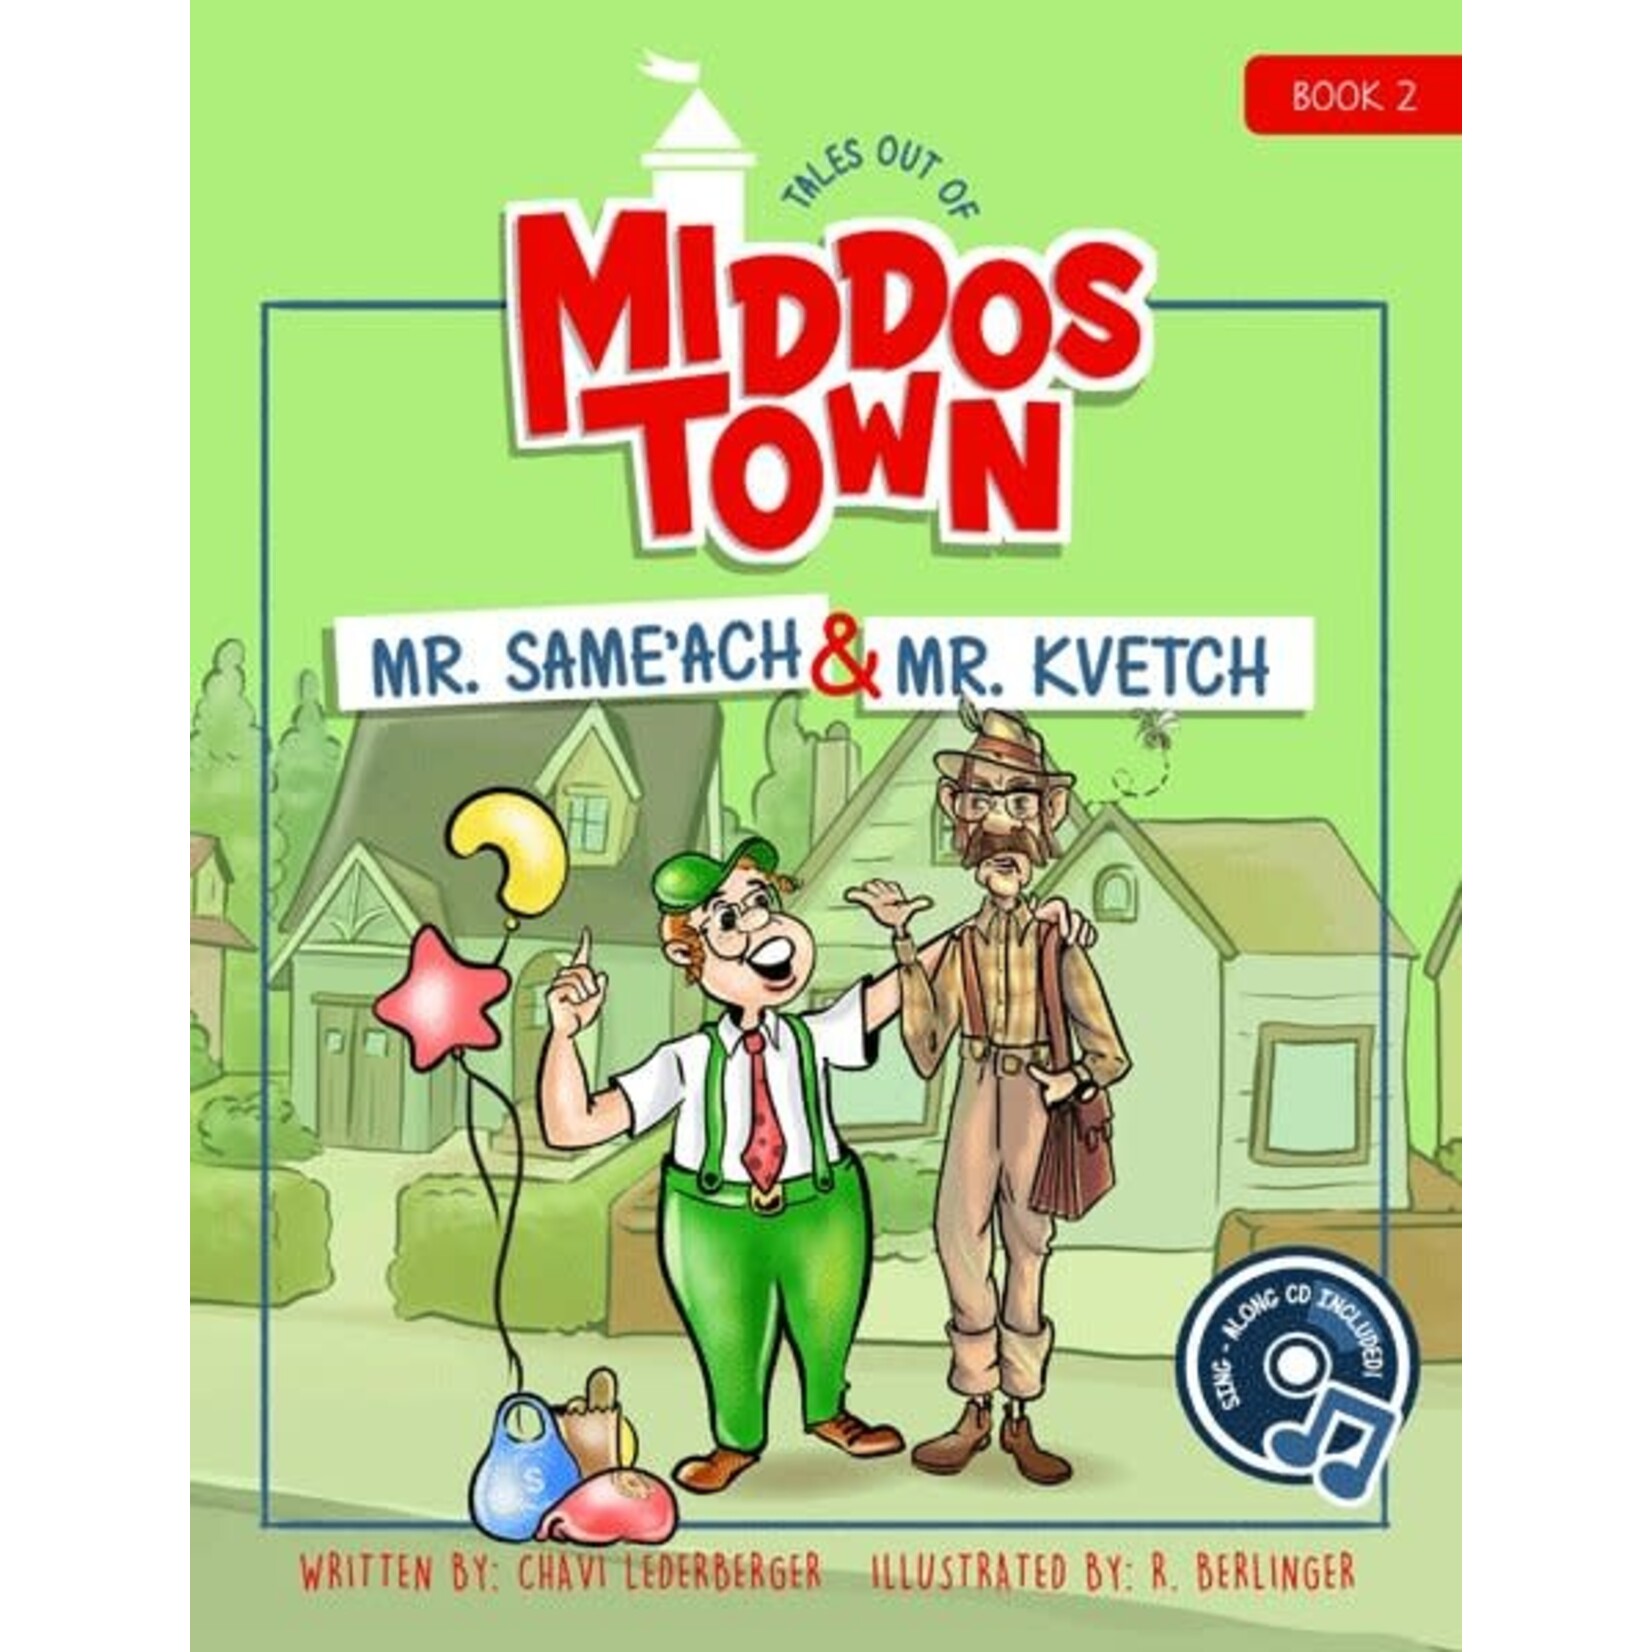 Tales Out of Middos Town: Mr Same'ach & Mr Kvetch